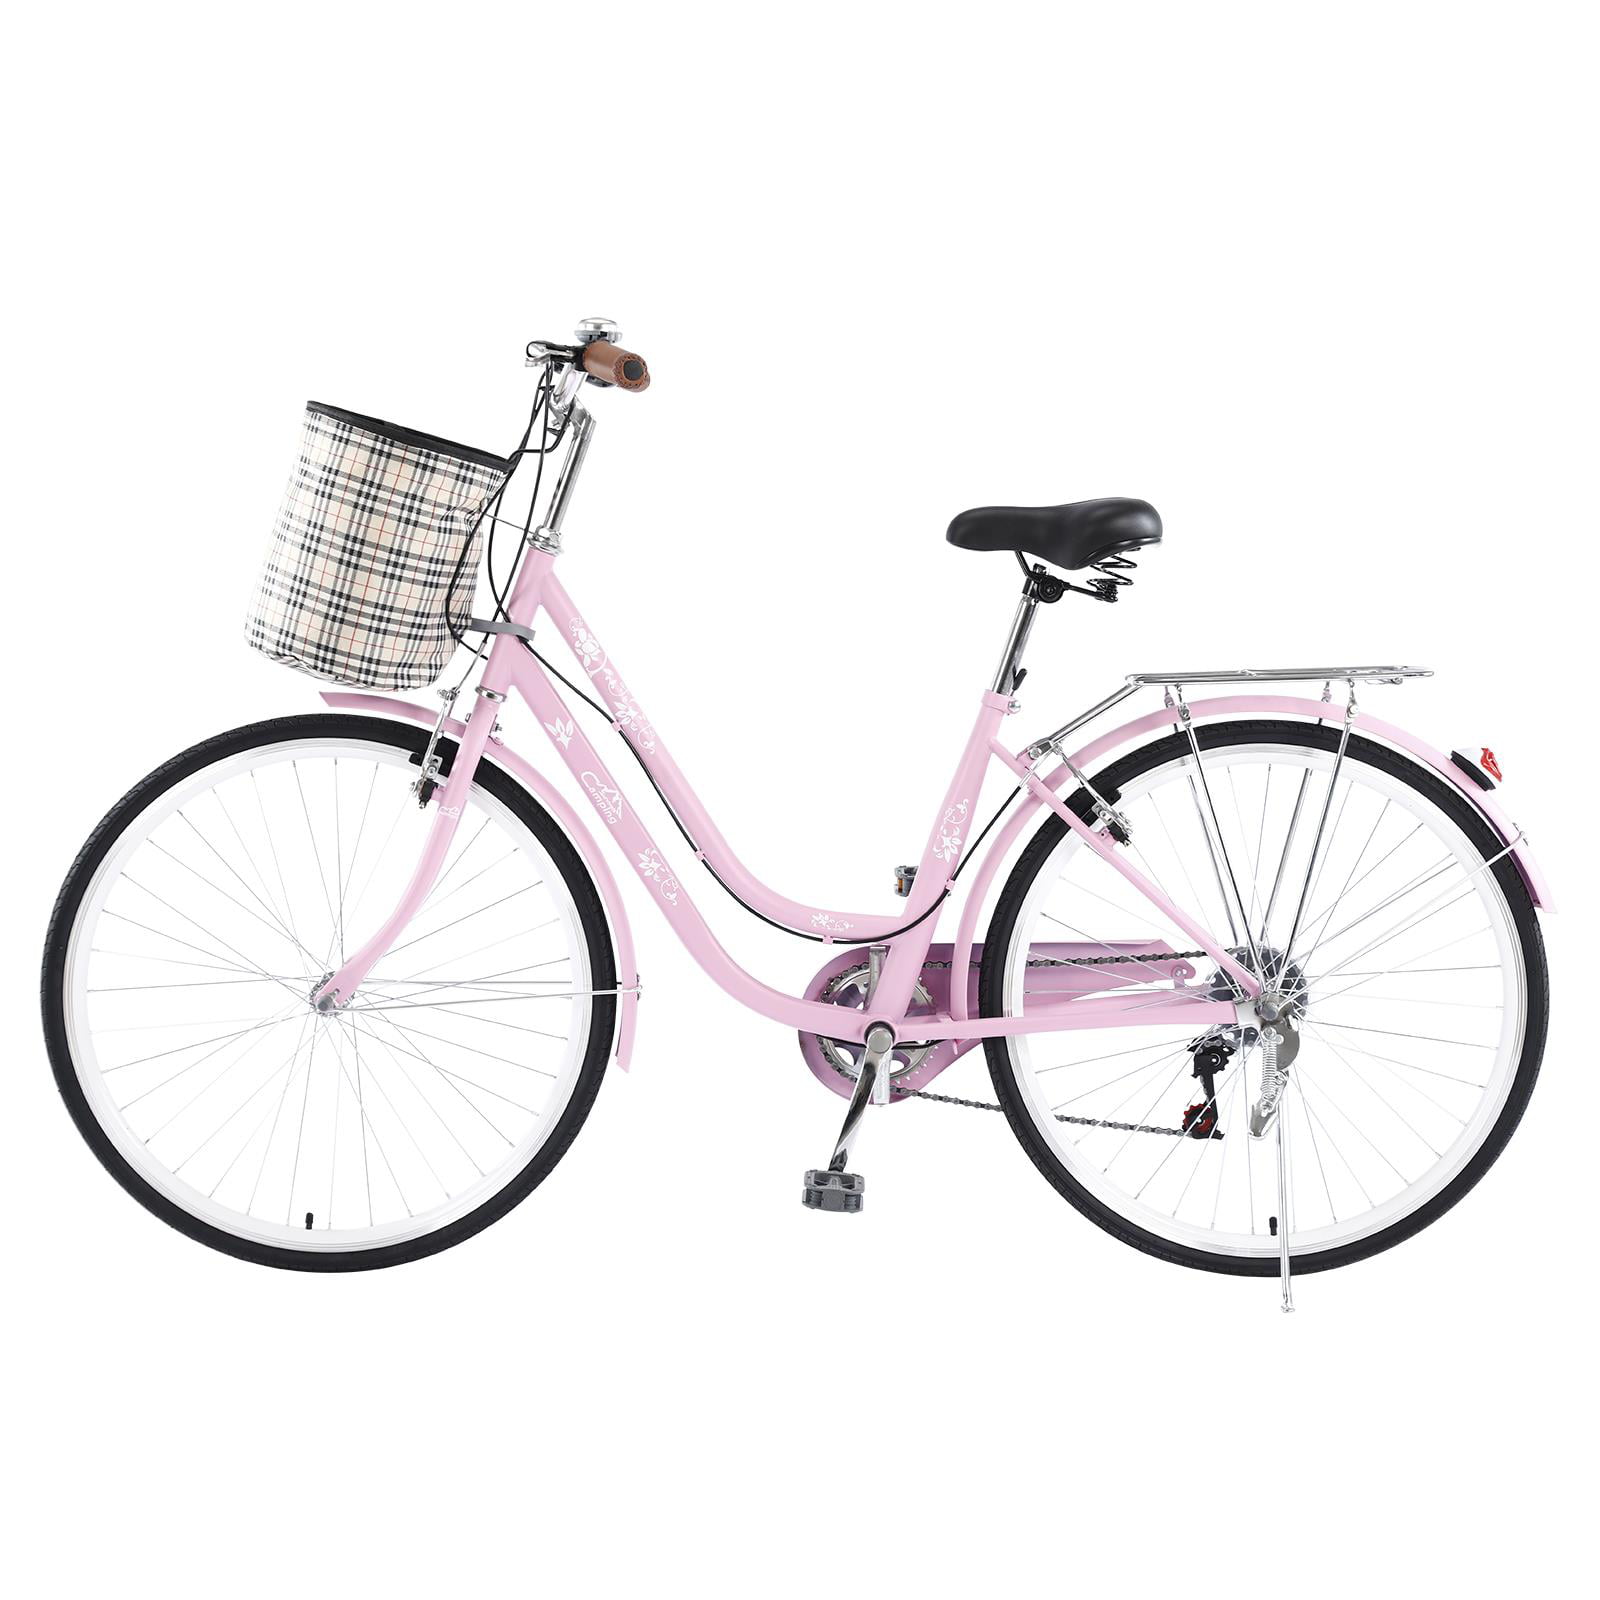 Campingsurvivals 26 Inch Commuter Bicycle With 7 Speed For Leisure Picnics Shopping Pink Walmart Com